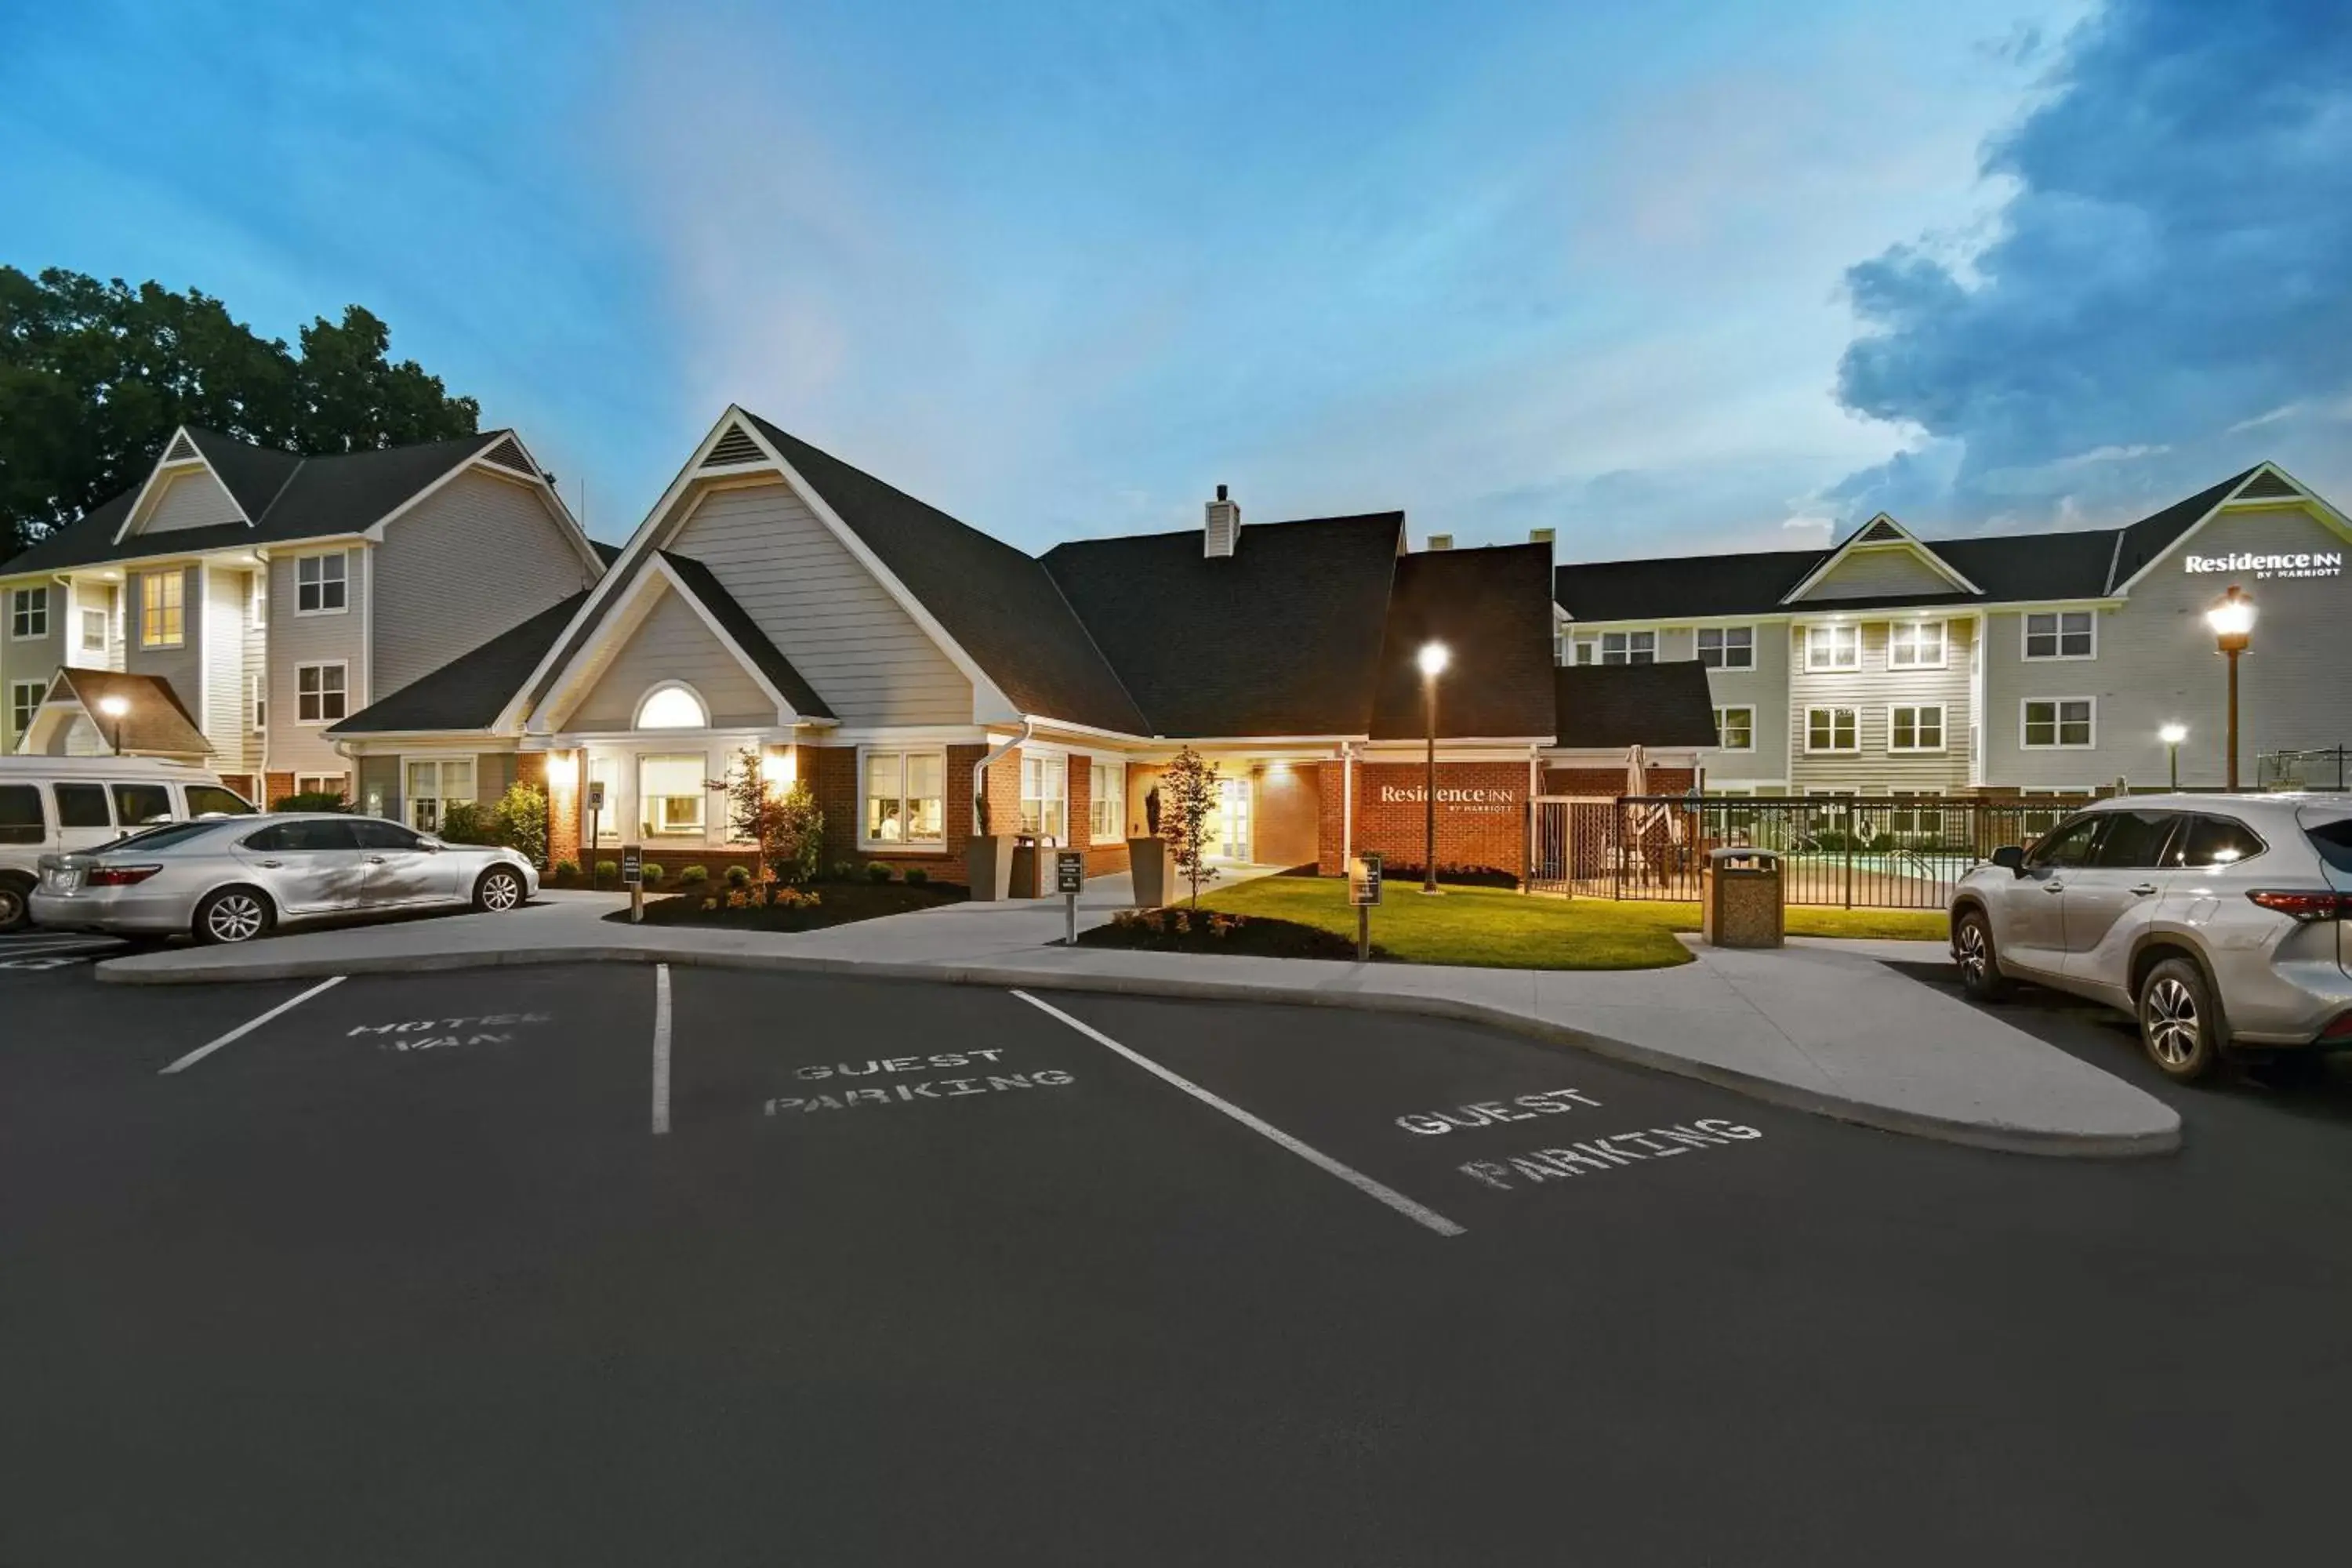 Property Building in Residence Inn Louisville Airport